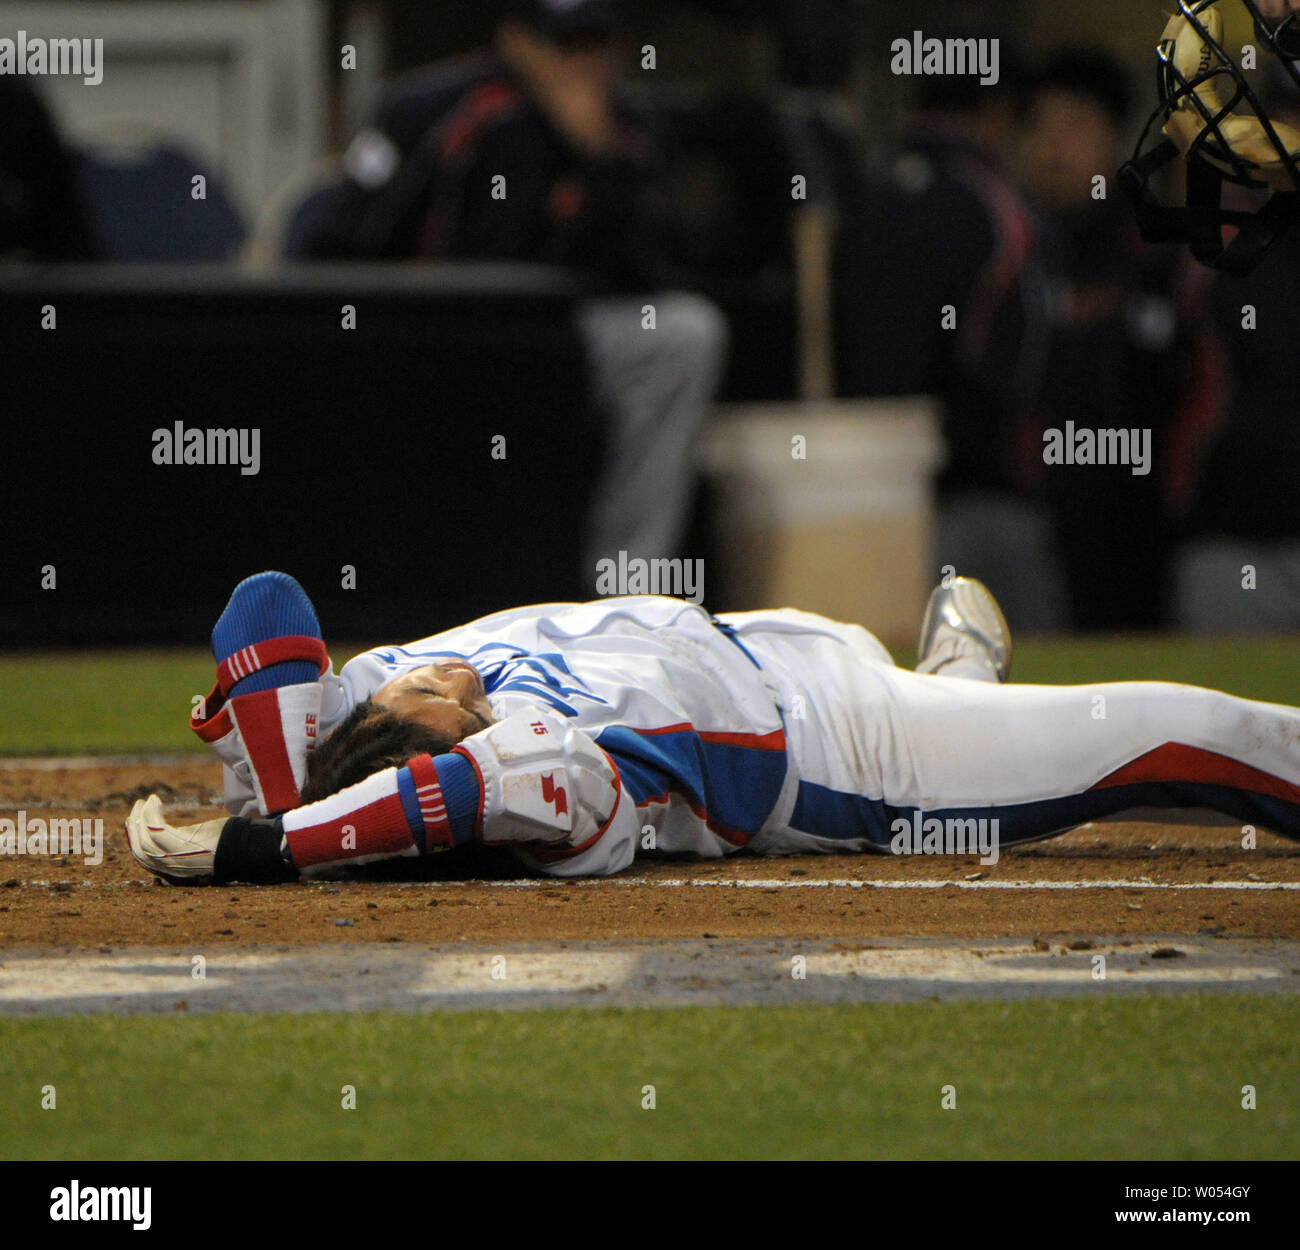 Lee Yong-Kyu of Team Korea holds his head after being hit by a pitch during the third inning against Team Japan during Round 2 of the World Baseball Classic in San Diego, March 19, 2009.  ( UPI Photo/Earl S. Cryer) Stock Photo